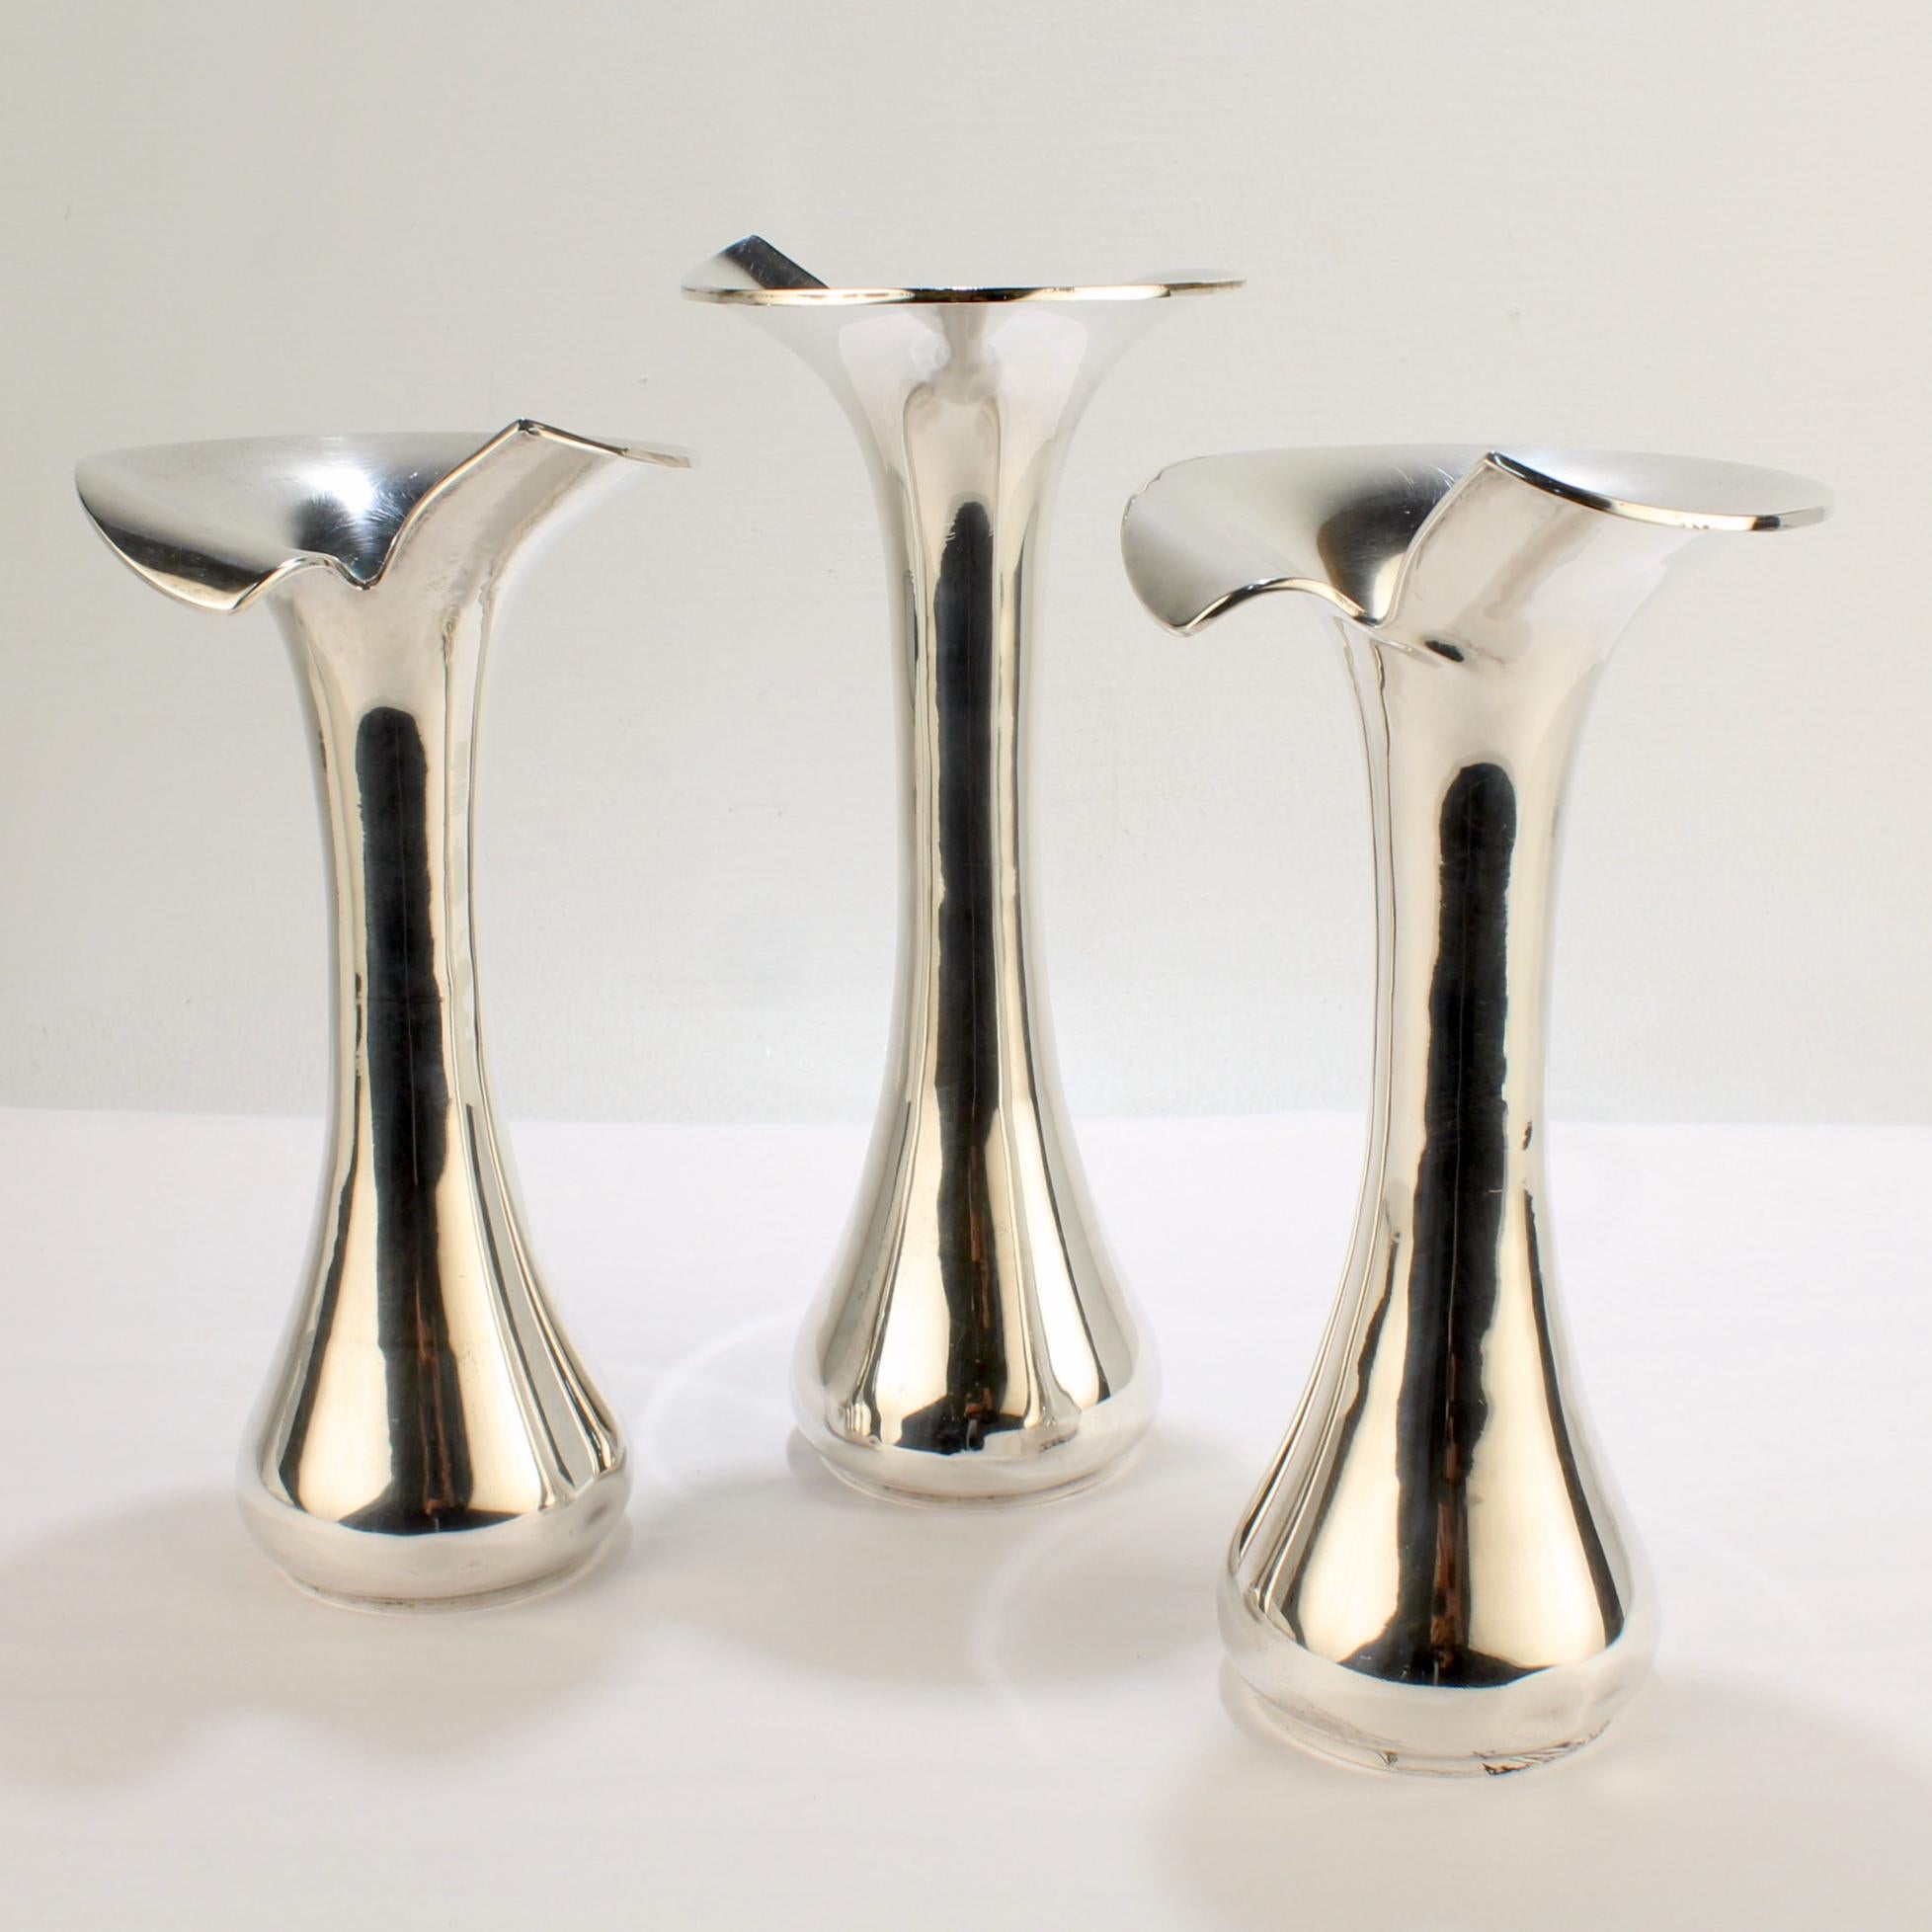 Set of 3 Brazilian Modernist .900 Solid Silver Flower Vases In Fair Condition For Sale In Philadelphia, PA